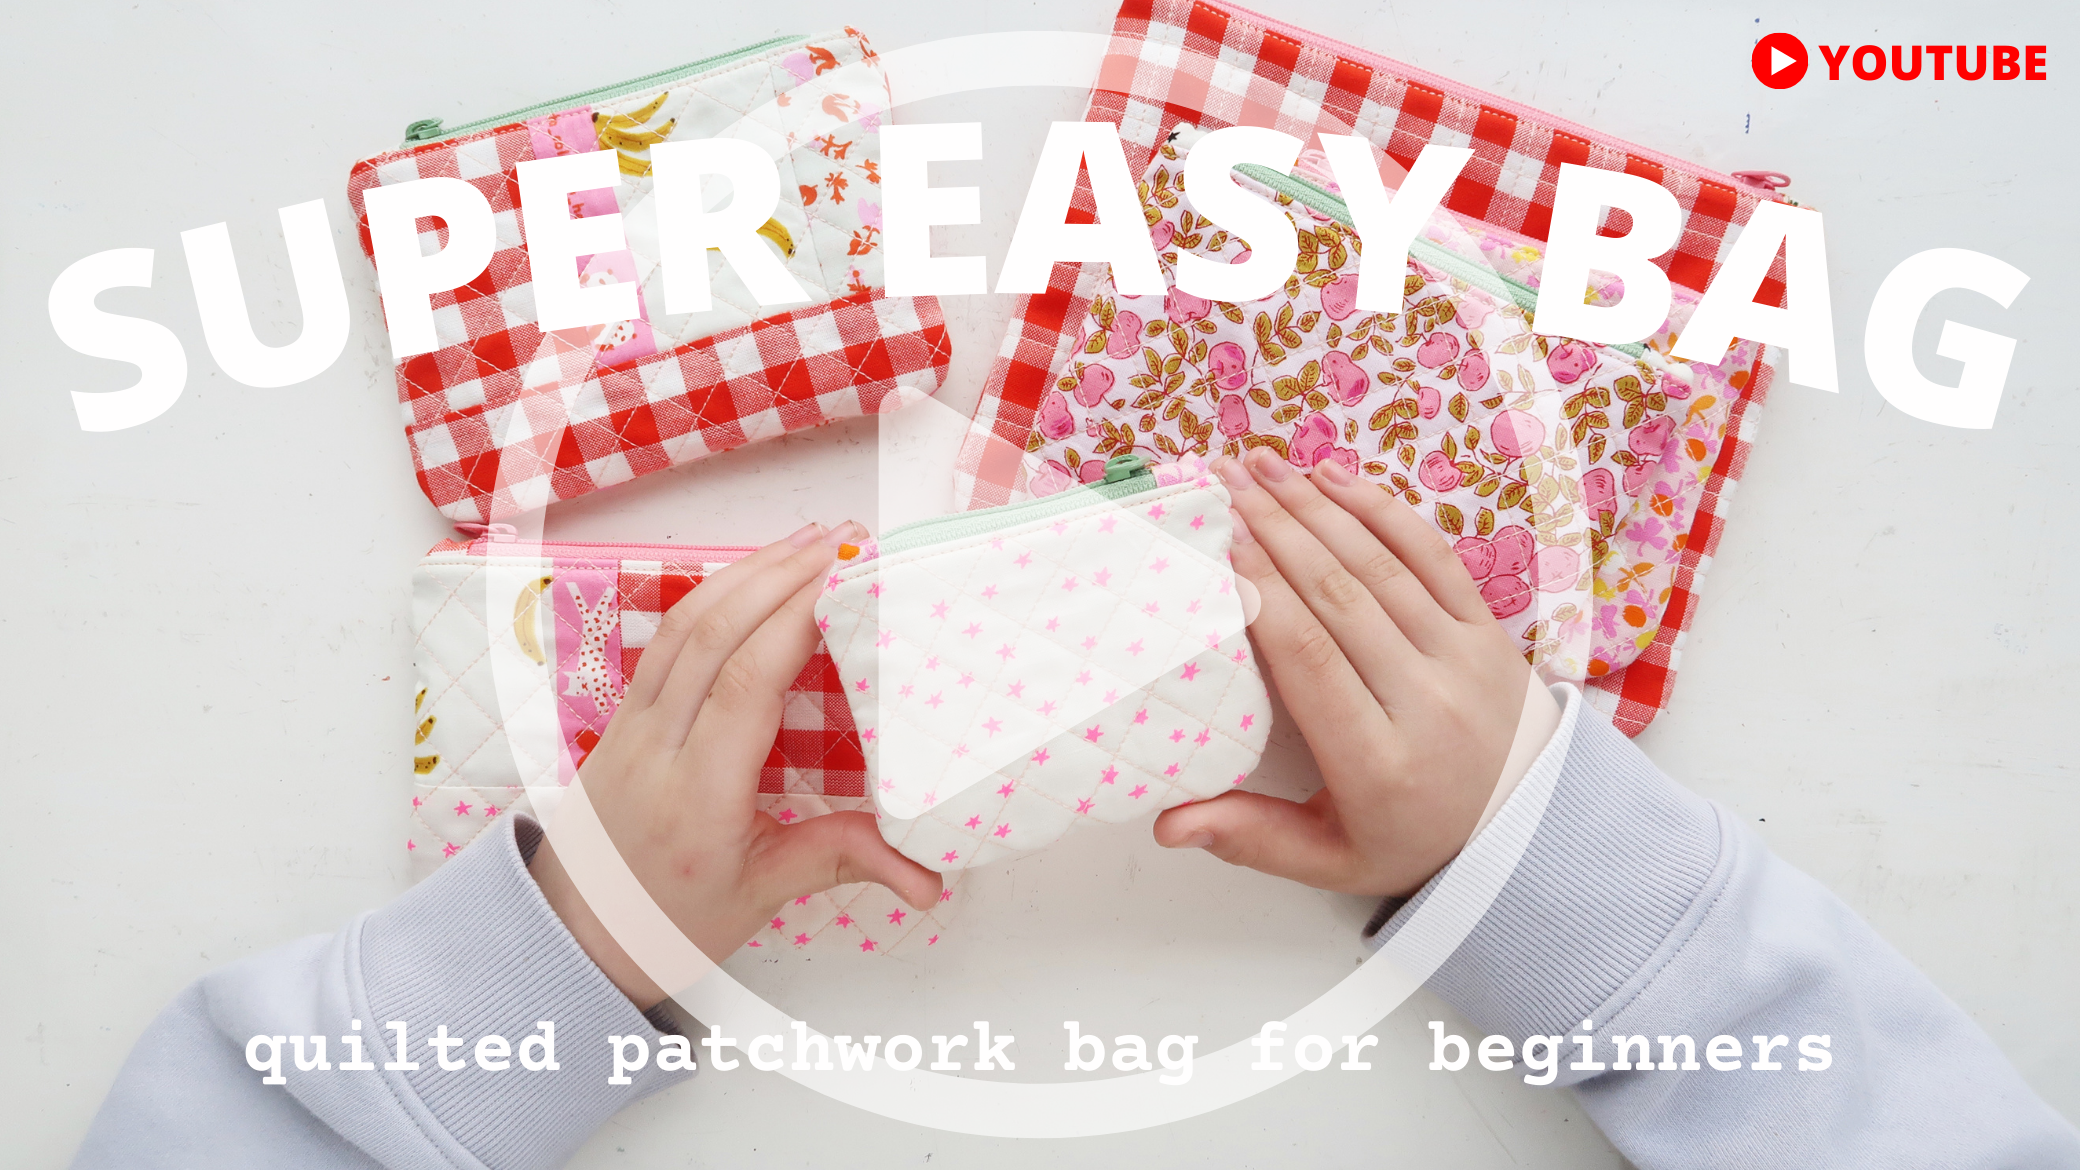 Super Easy Bag - sewing pattern and video tutorial